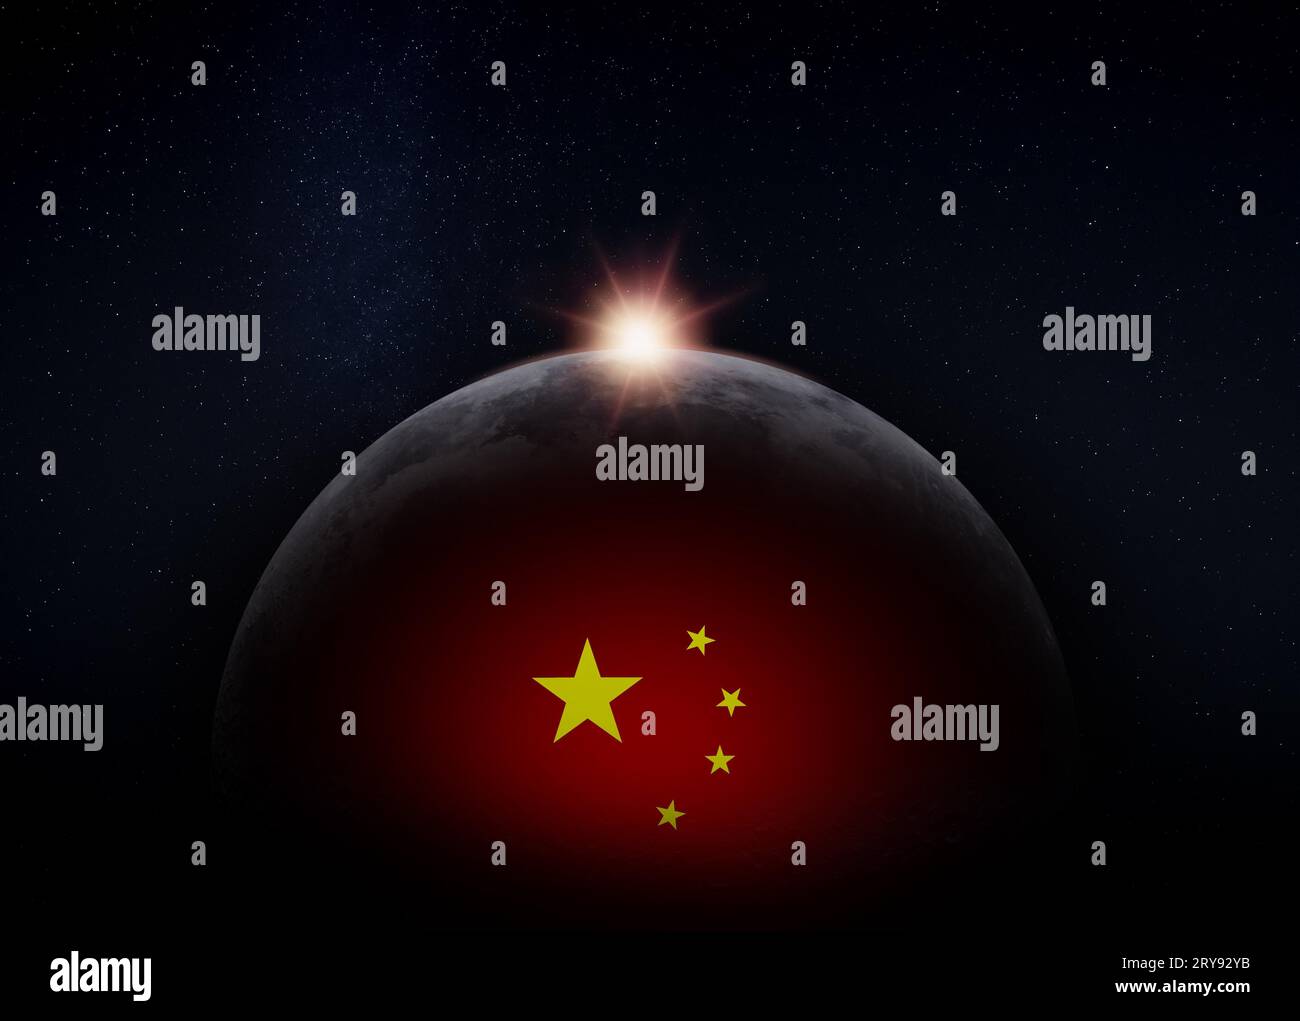 View of the dark hidden side of the Moon with the Chinese flag on it and the Sun behind it. Negative space for copy text. Elements of this image Stock Photo